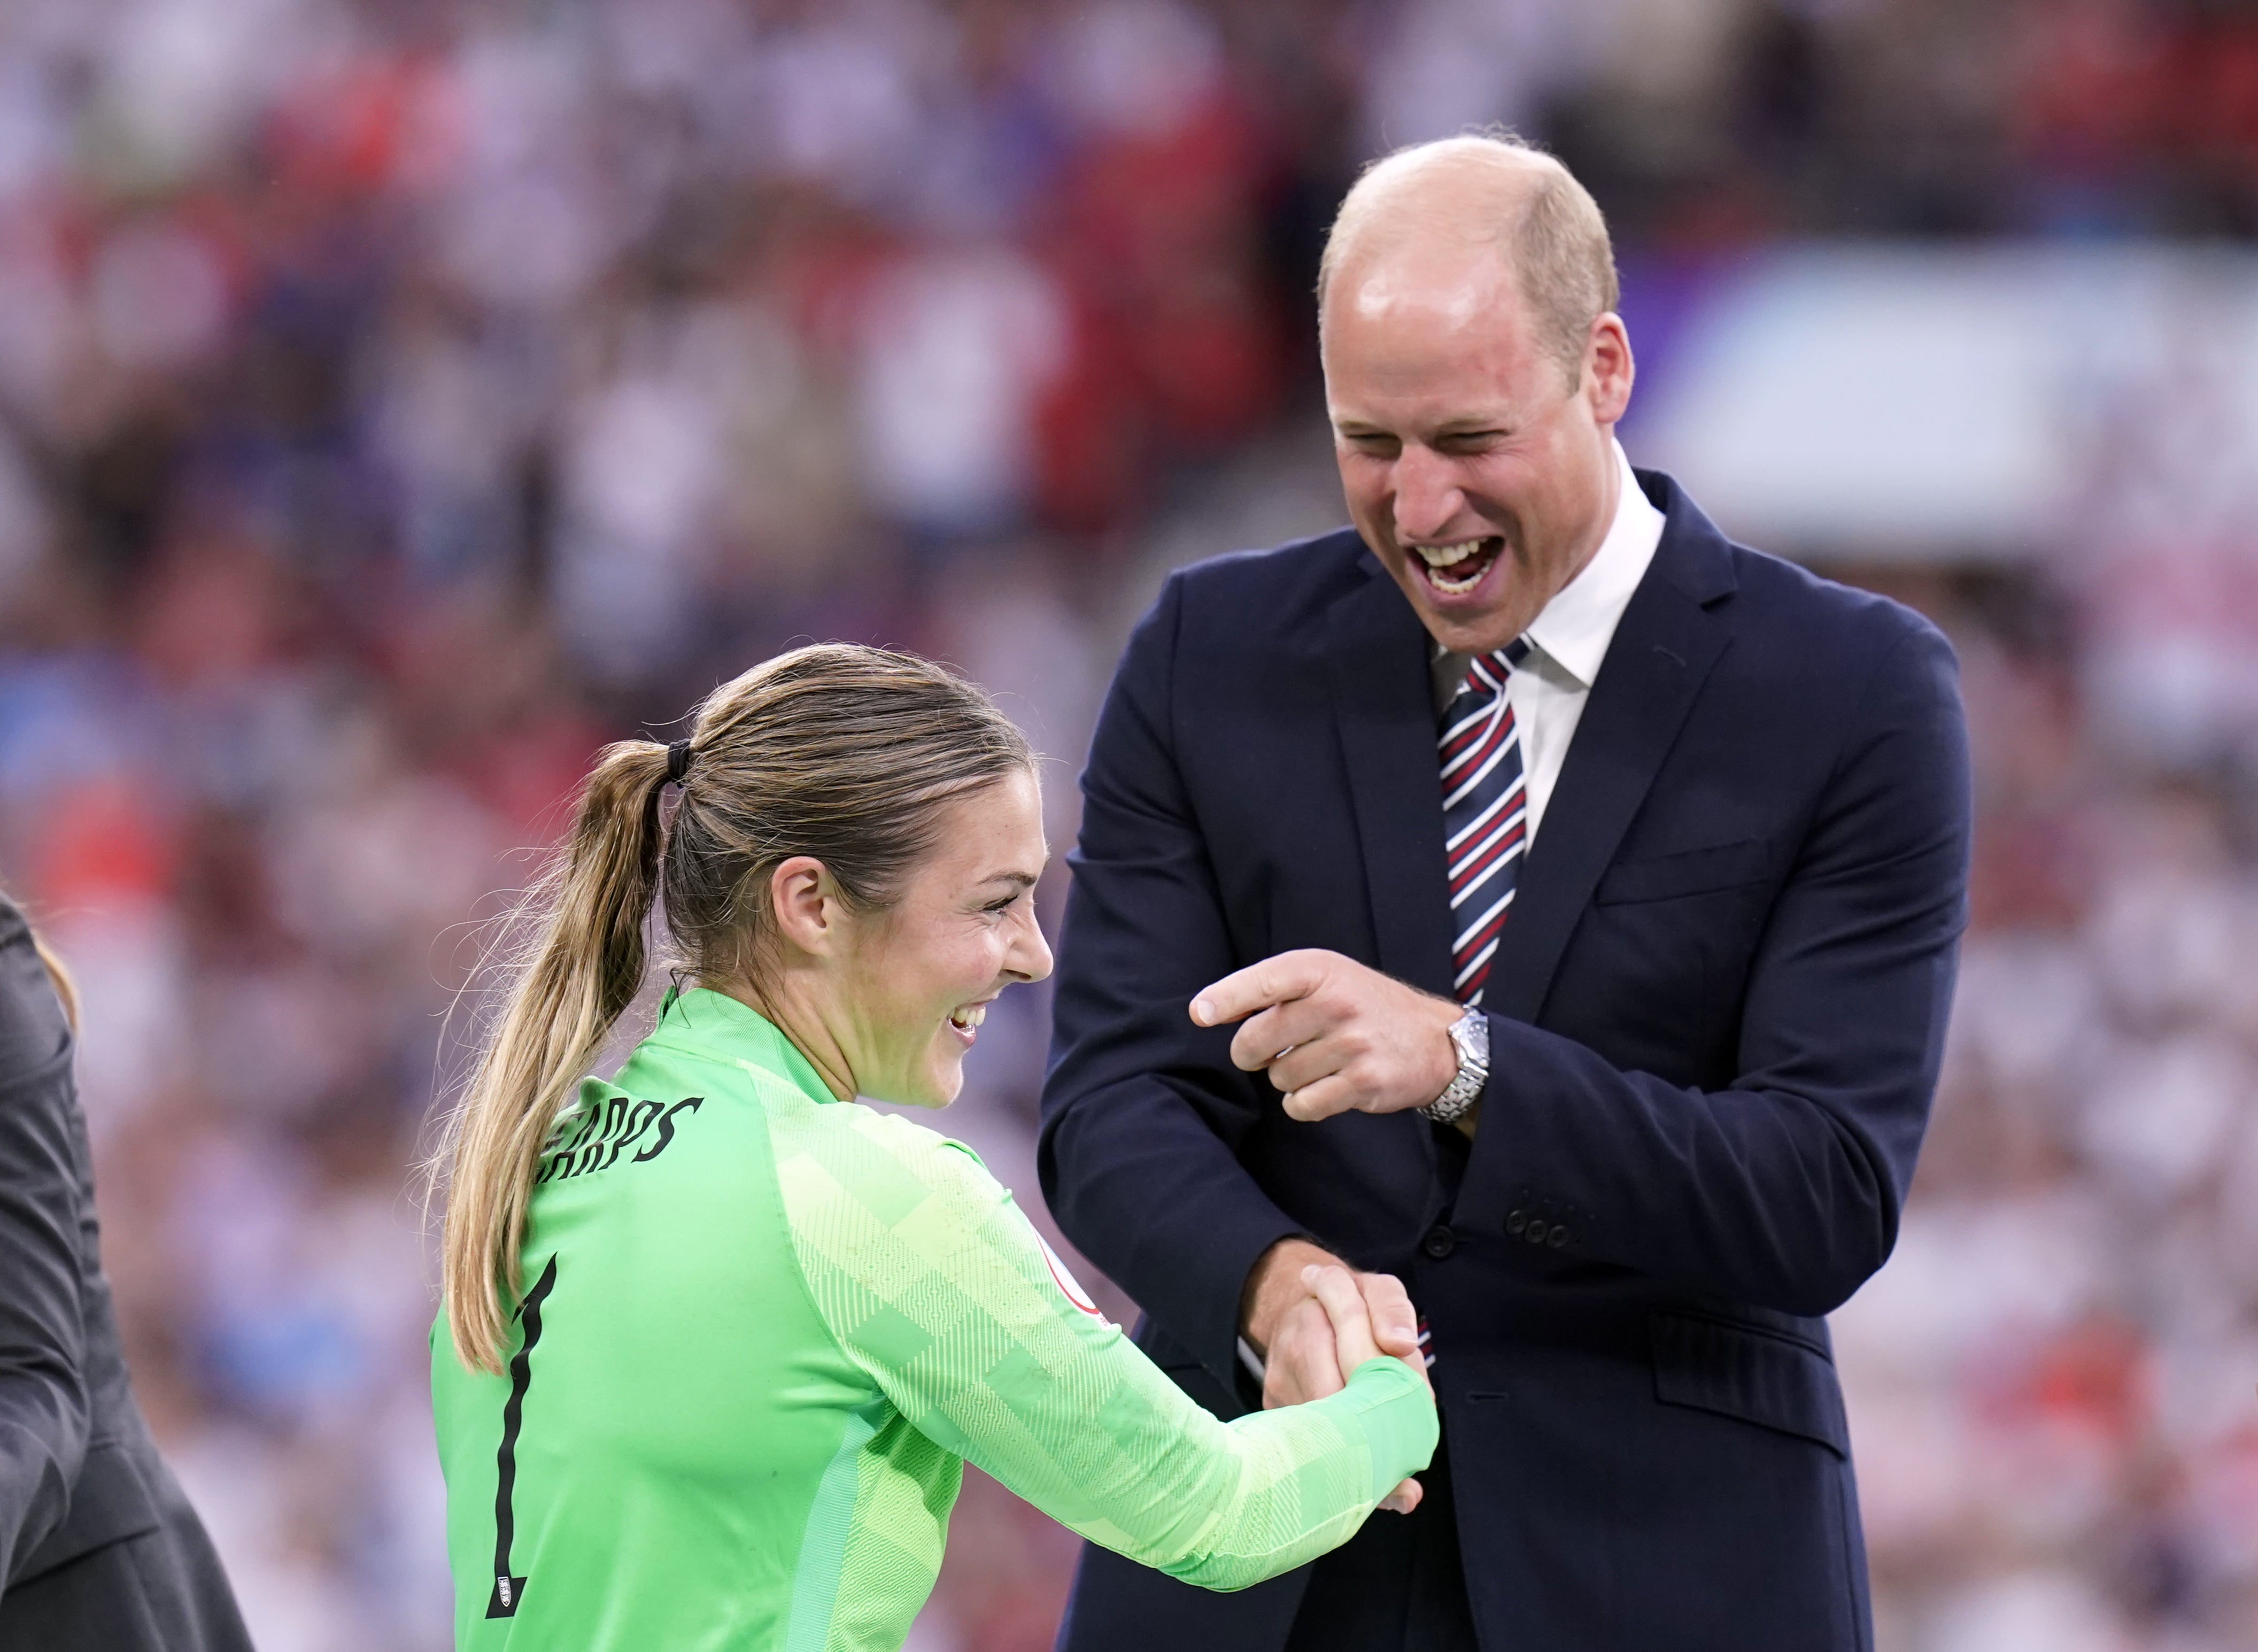 England goalkeeper Mary Earps with The Duke of Cambridge following England’s victory over Germany in the UEFA Women’s Euro 2022 final at Wembley (Danny Lawson/PA)